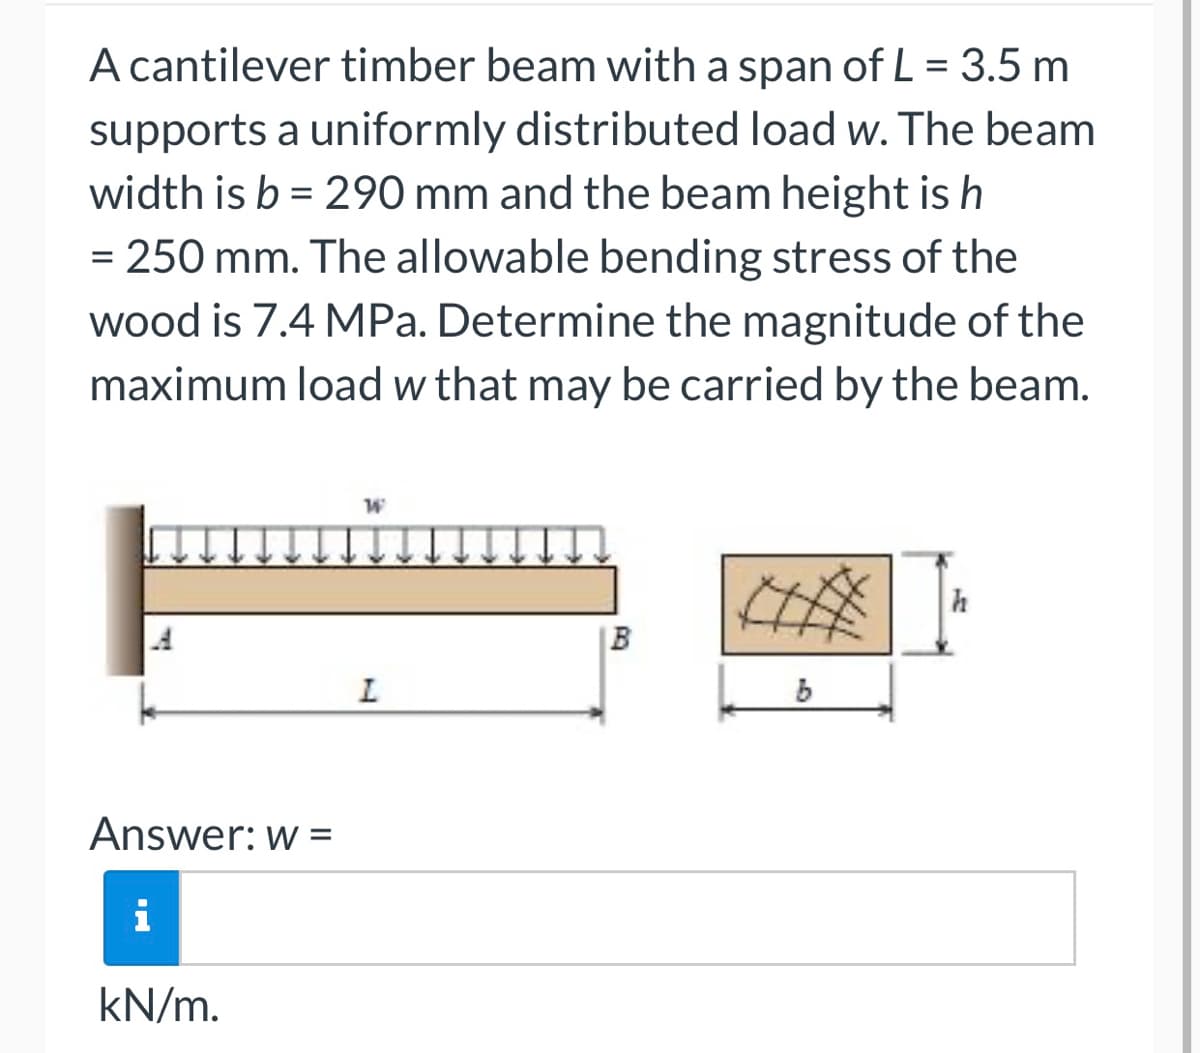 A cantilever timber beam with a span of L = 3.5 m
supports a uniformly distributed load w. The beam
width is b = 290 mm and the beam height is h
= 250 mm. The allowable bending stress of the
wood is 7.4 MPa. Determine the magnitude of the
maximum load w that may be carried by the beam.
Answer: w =
i
kN/m.
W
L
B
6
h